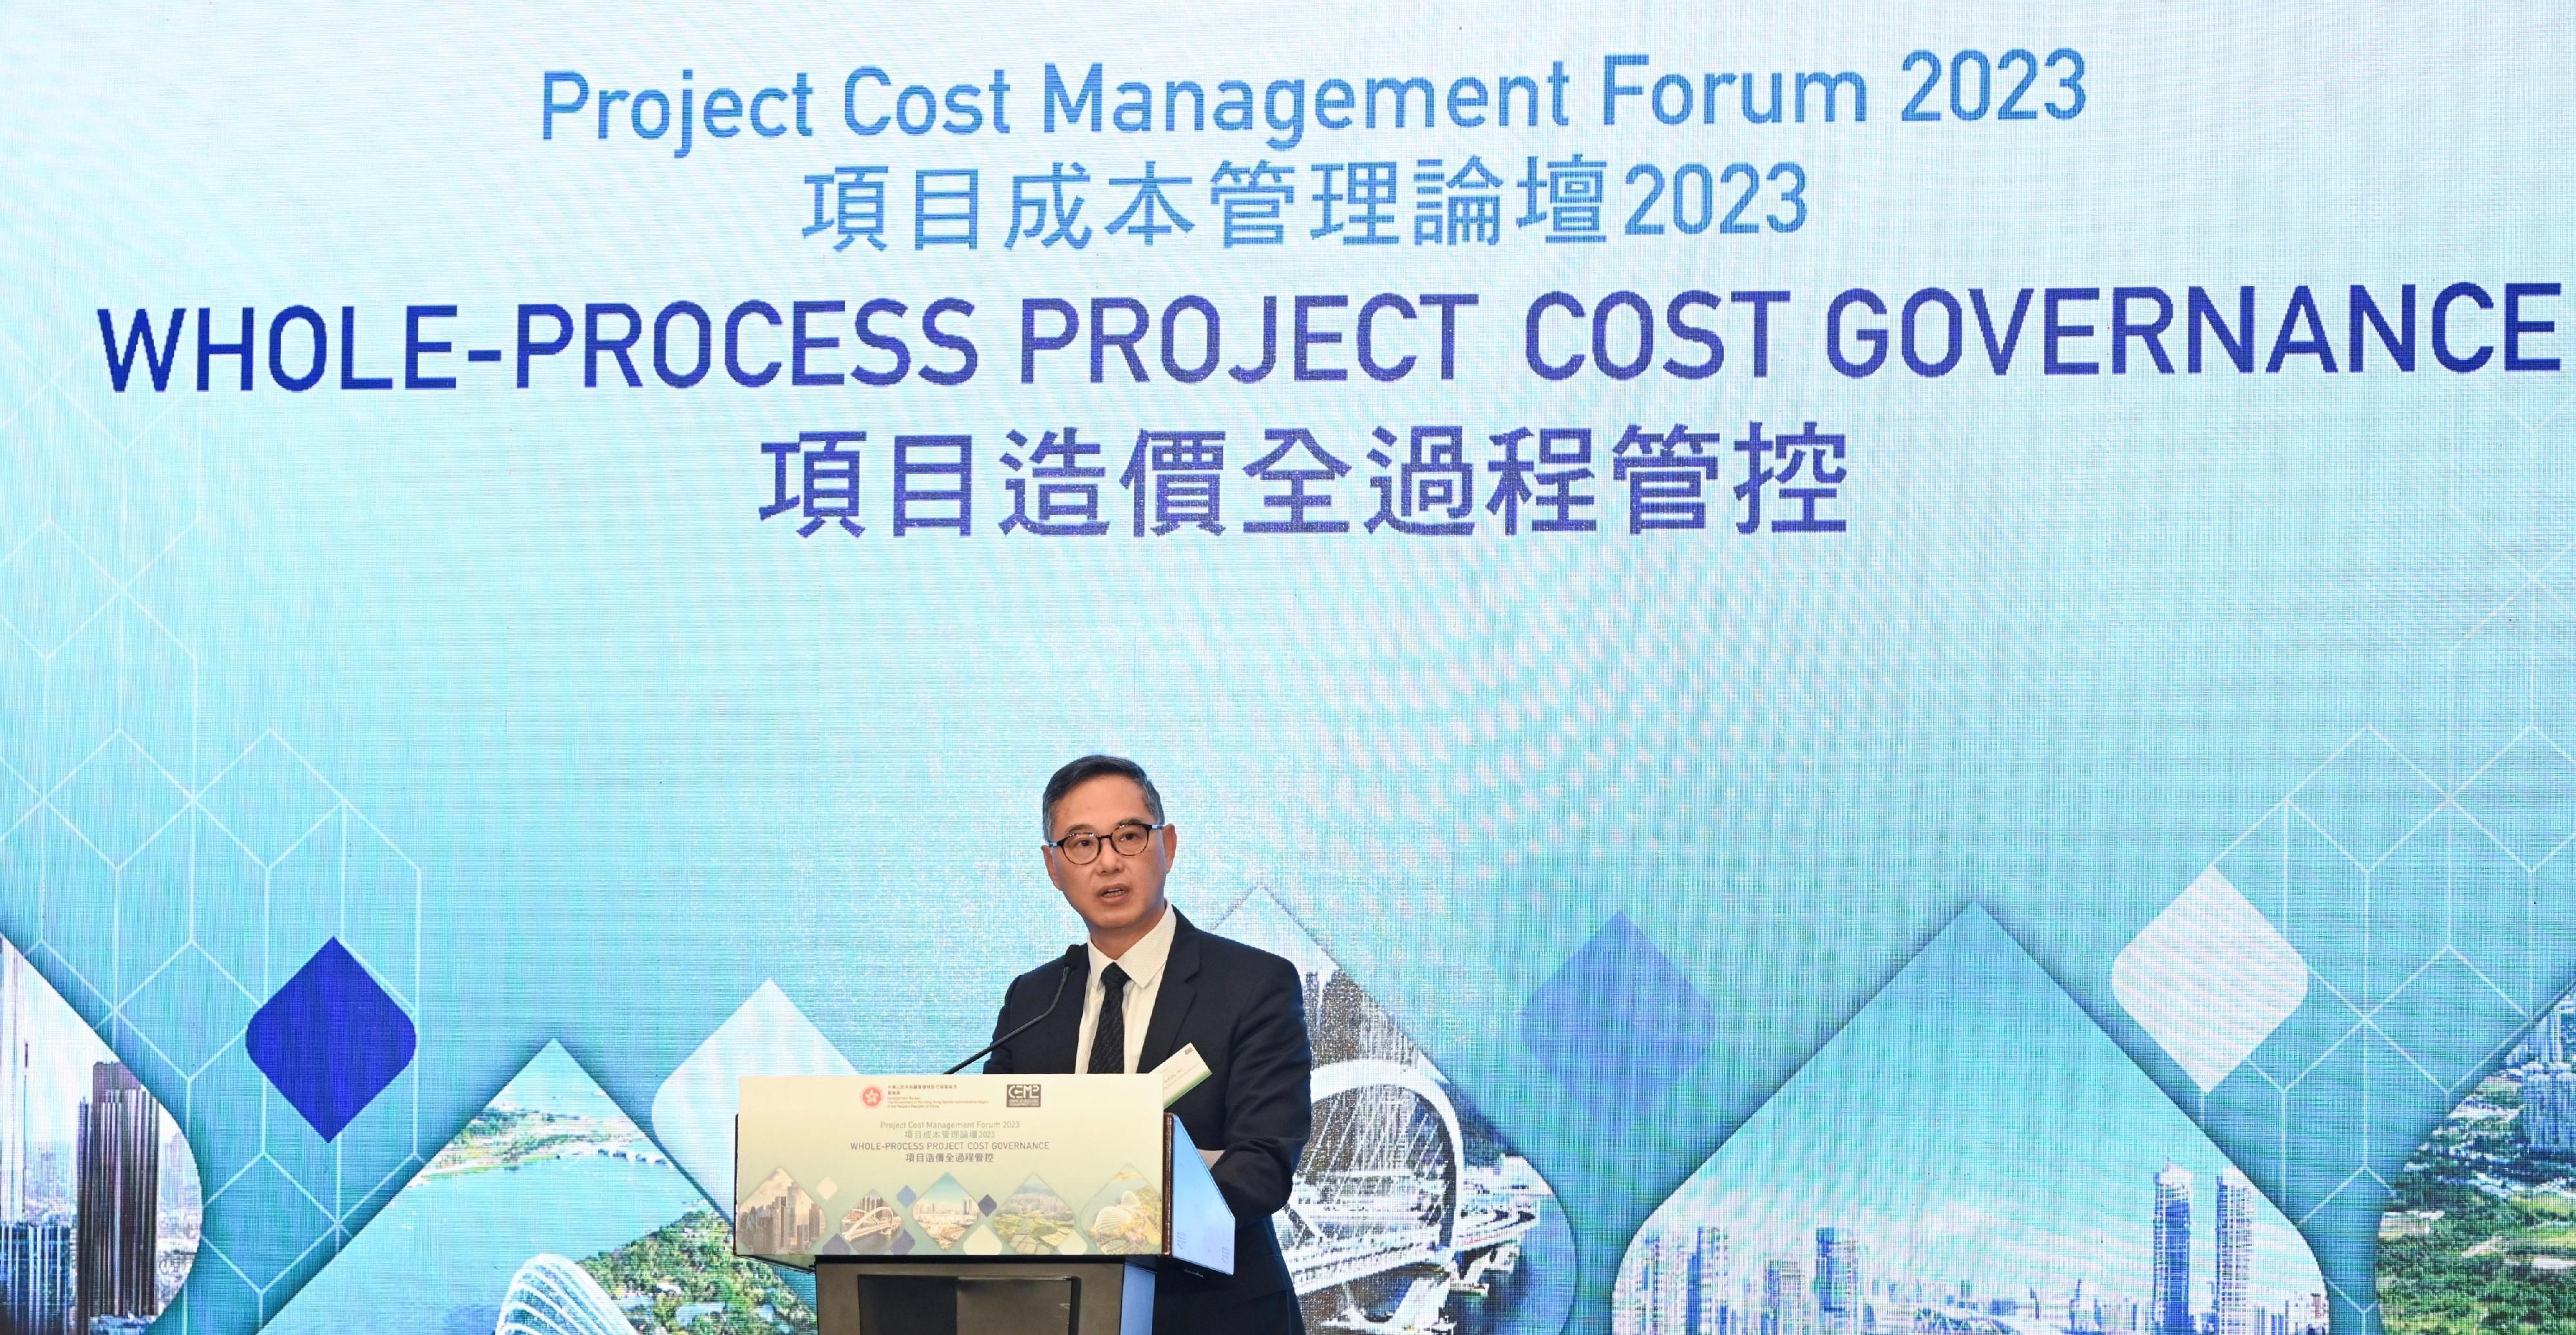 The Development Bureau today (November 1) organised the Project Cost Management Forum 2023 to promote the importance of cost management towards a sustainable development of the construction industry. Photo shows the Permanent Secretary for Development (Works), Mr Ricky Lau, delivering the opening speech at the forum.